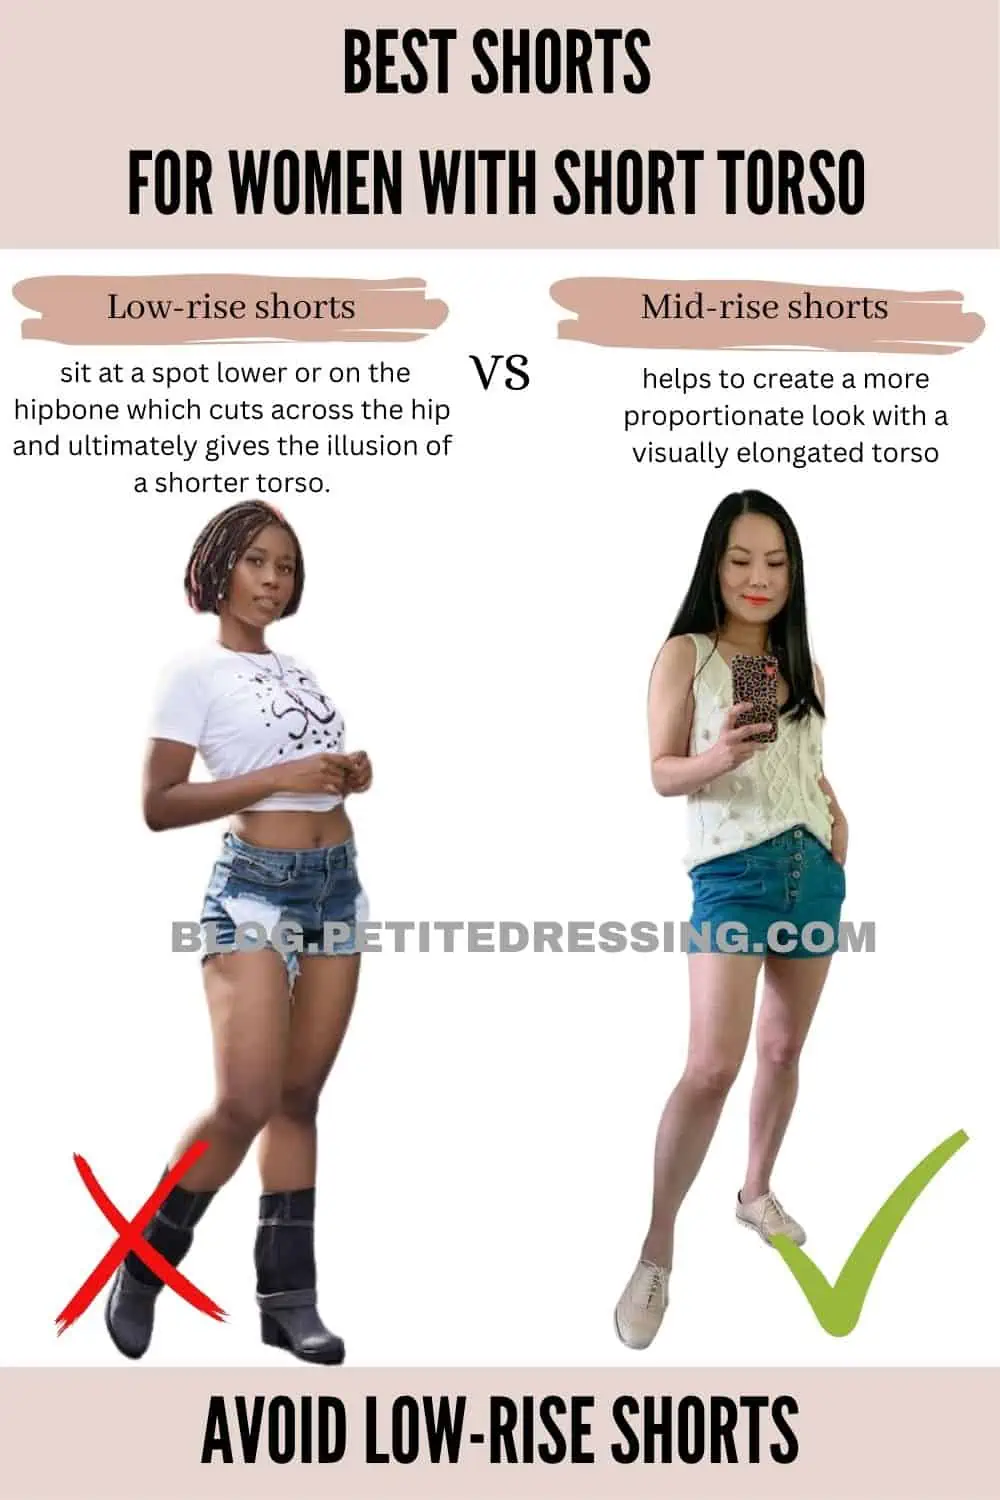 Shorts guide for women with a short